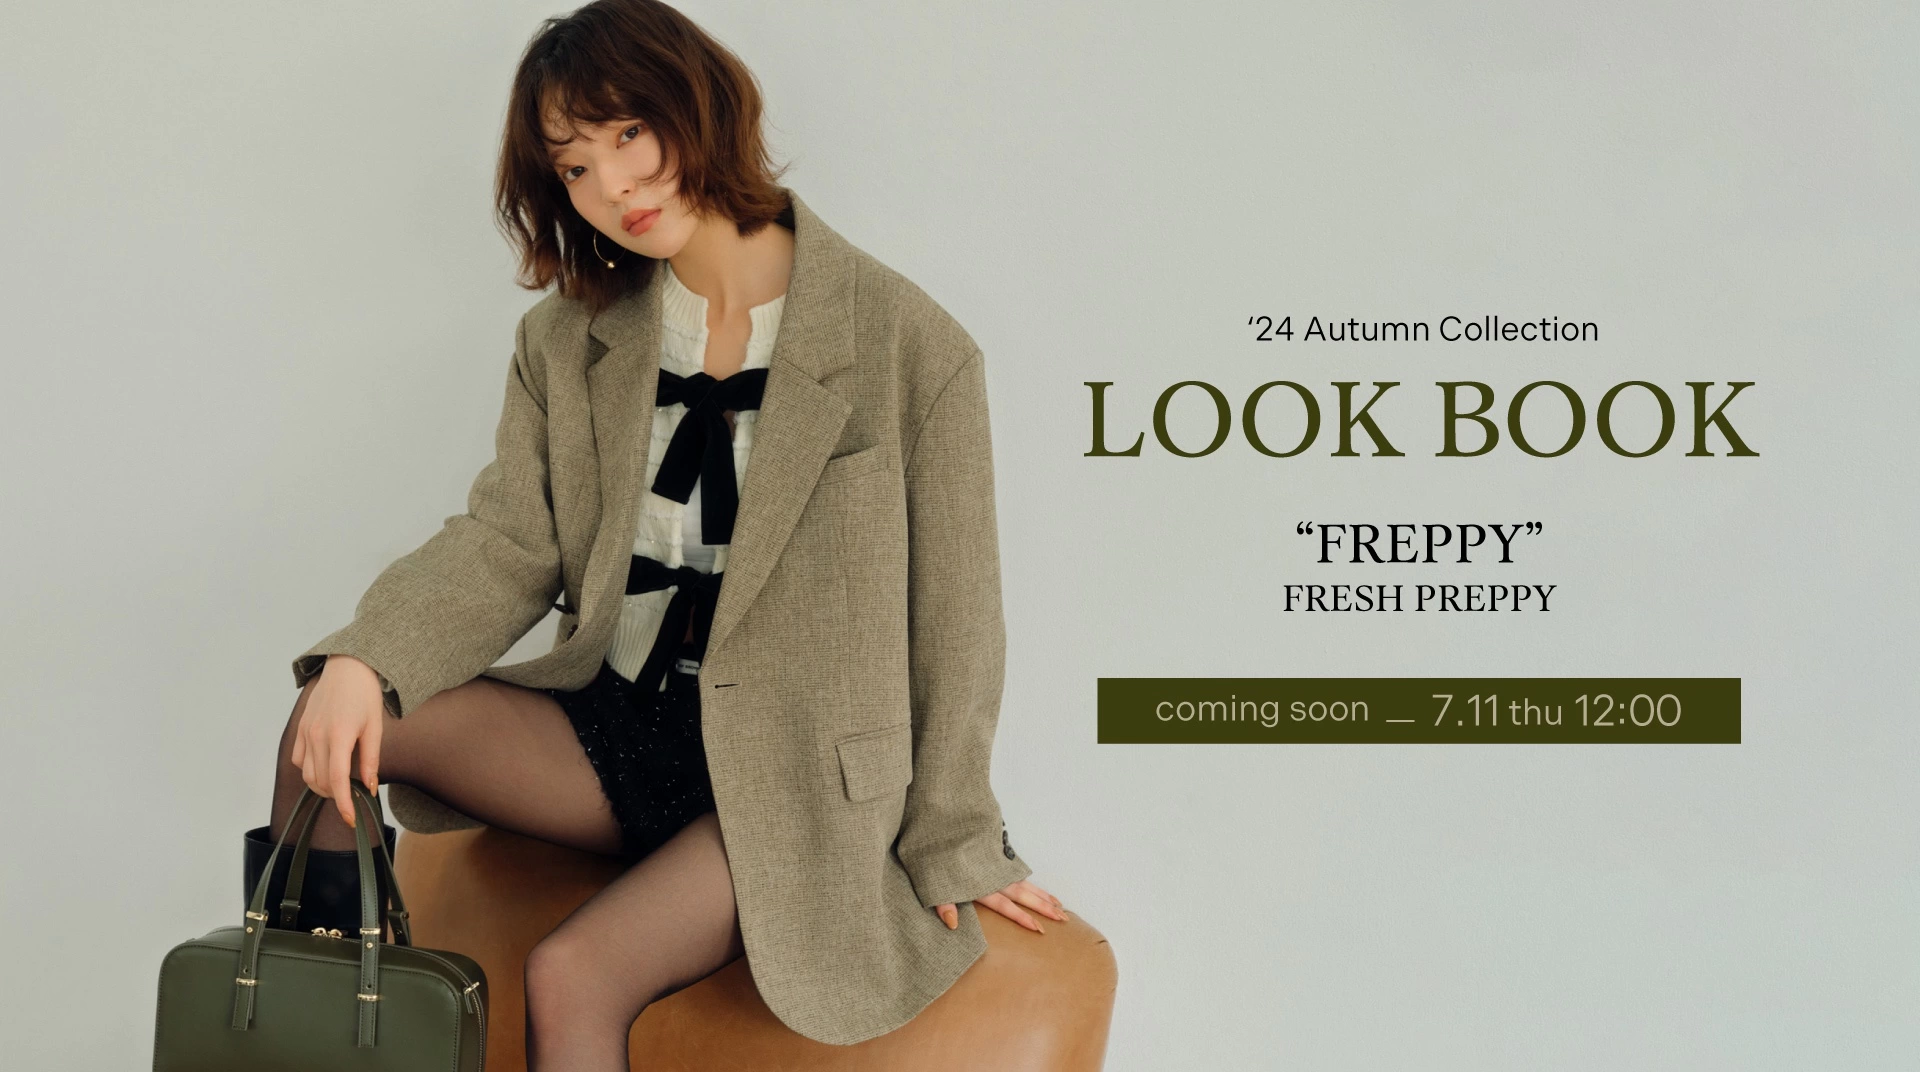 LILY BROWN 2024 Autumn Collection LOOK BOOK "FREPPY" FRESH PREPPY